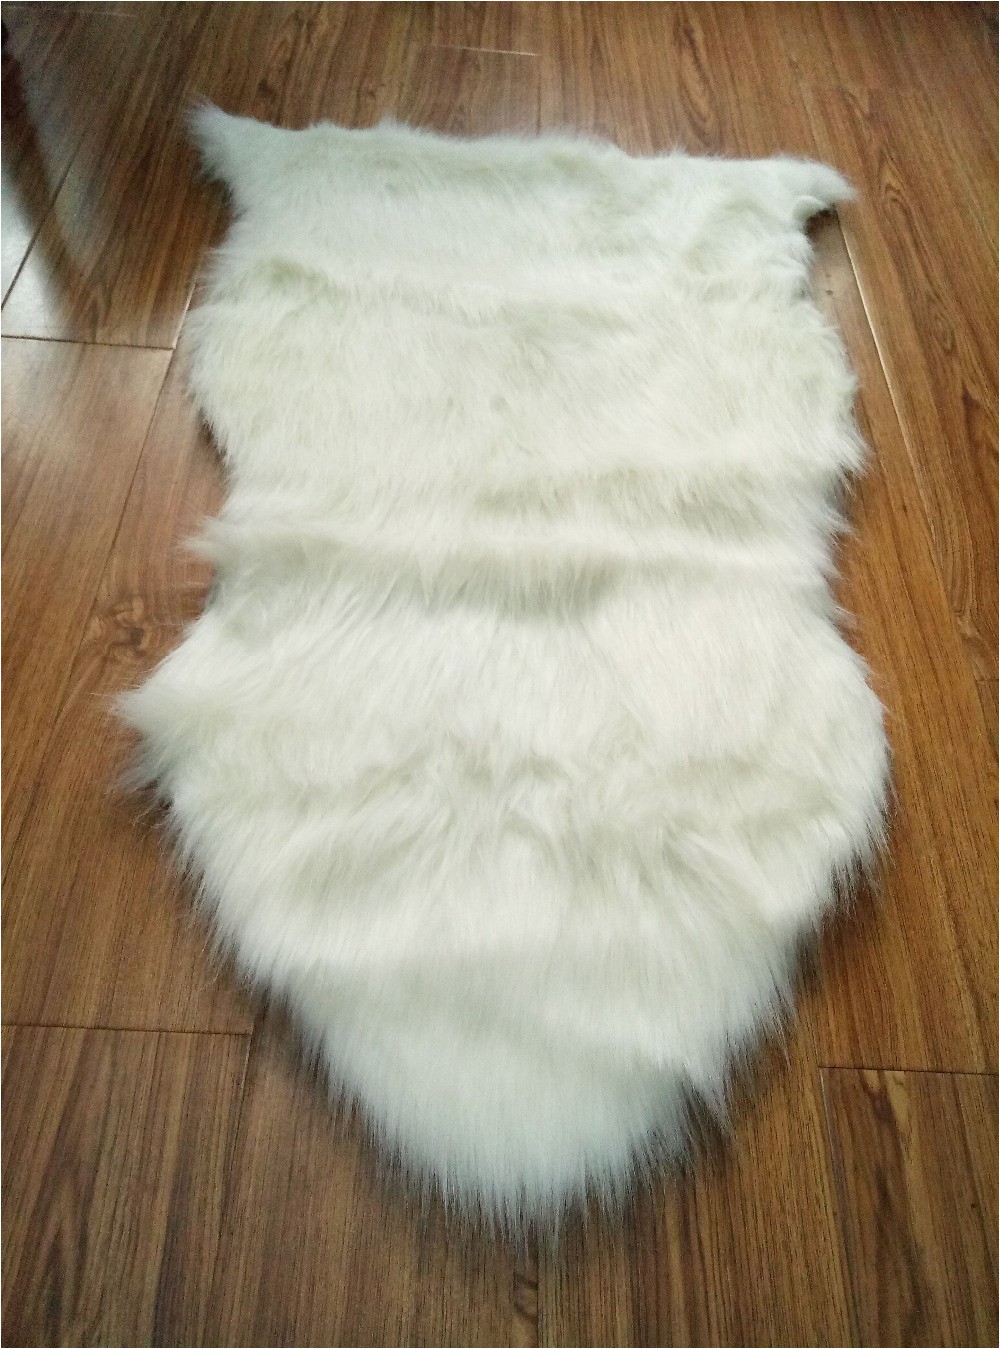 White Faux Sheepskin area Rug Us $11 99 Off White Nice Looking Faux Sheepskin Rug soft Chair Cover Pad soft Carpet Hairy Plain Skin area Rugs Bedroom Faux Fur Carpet Mat In